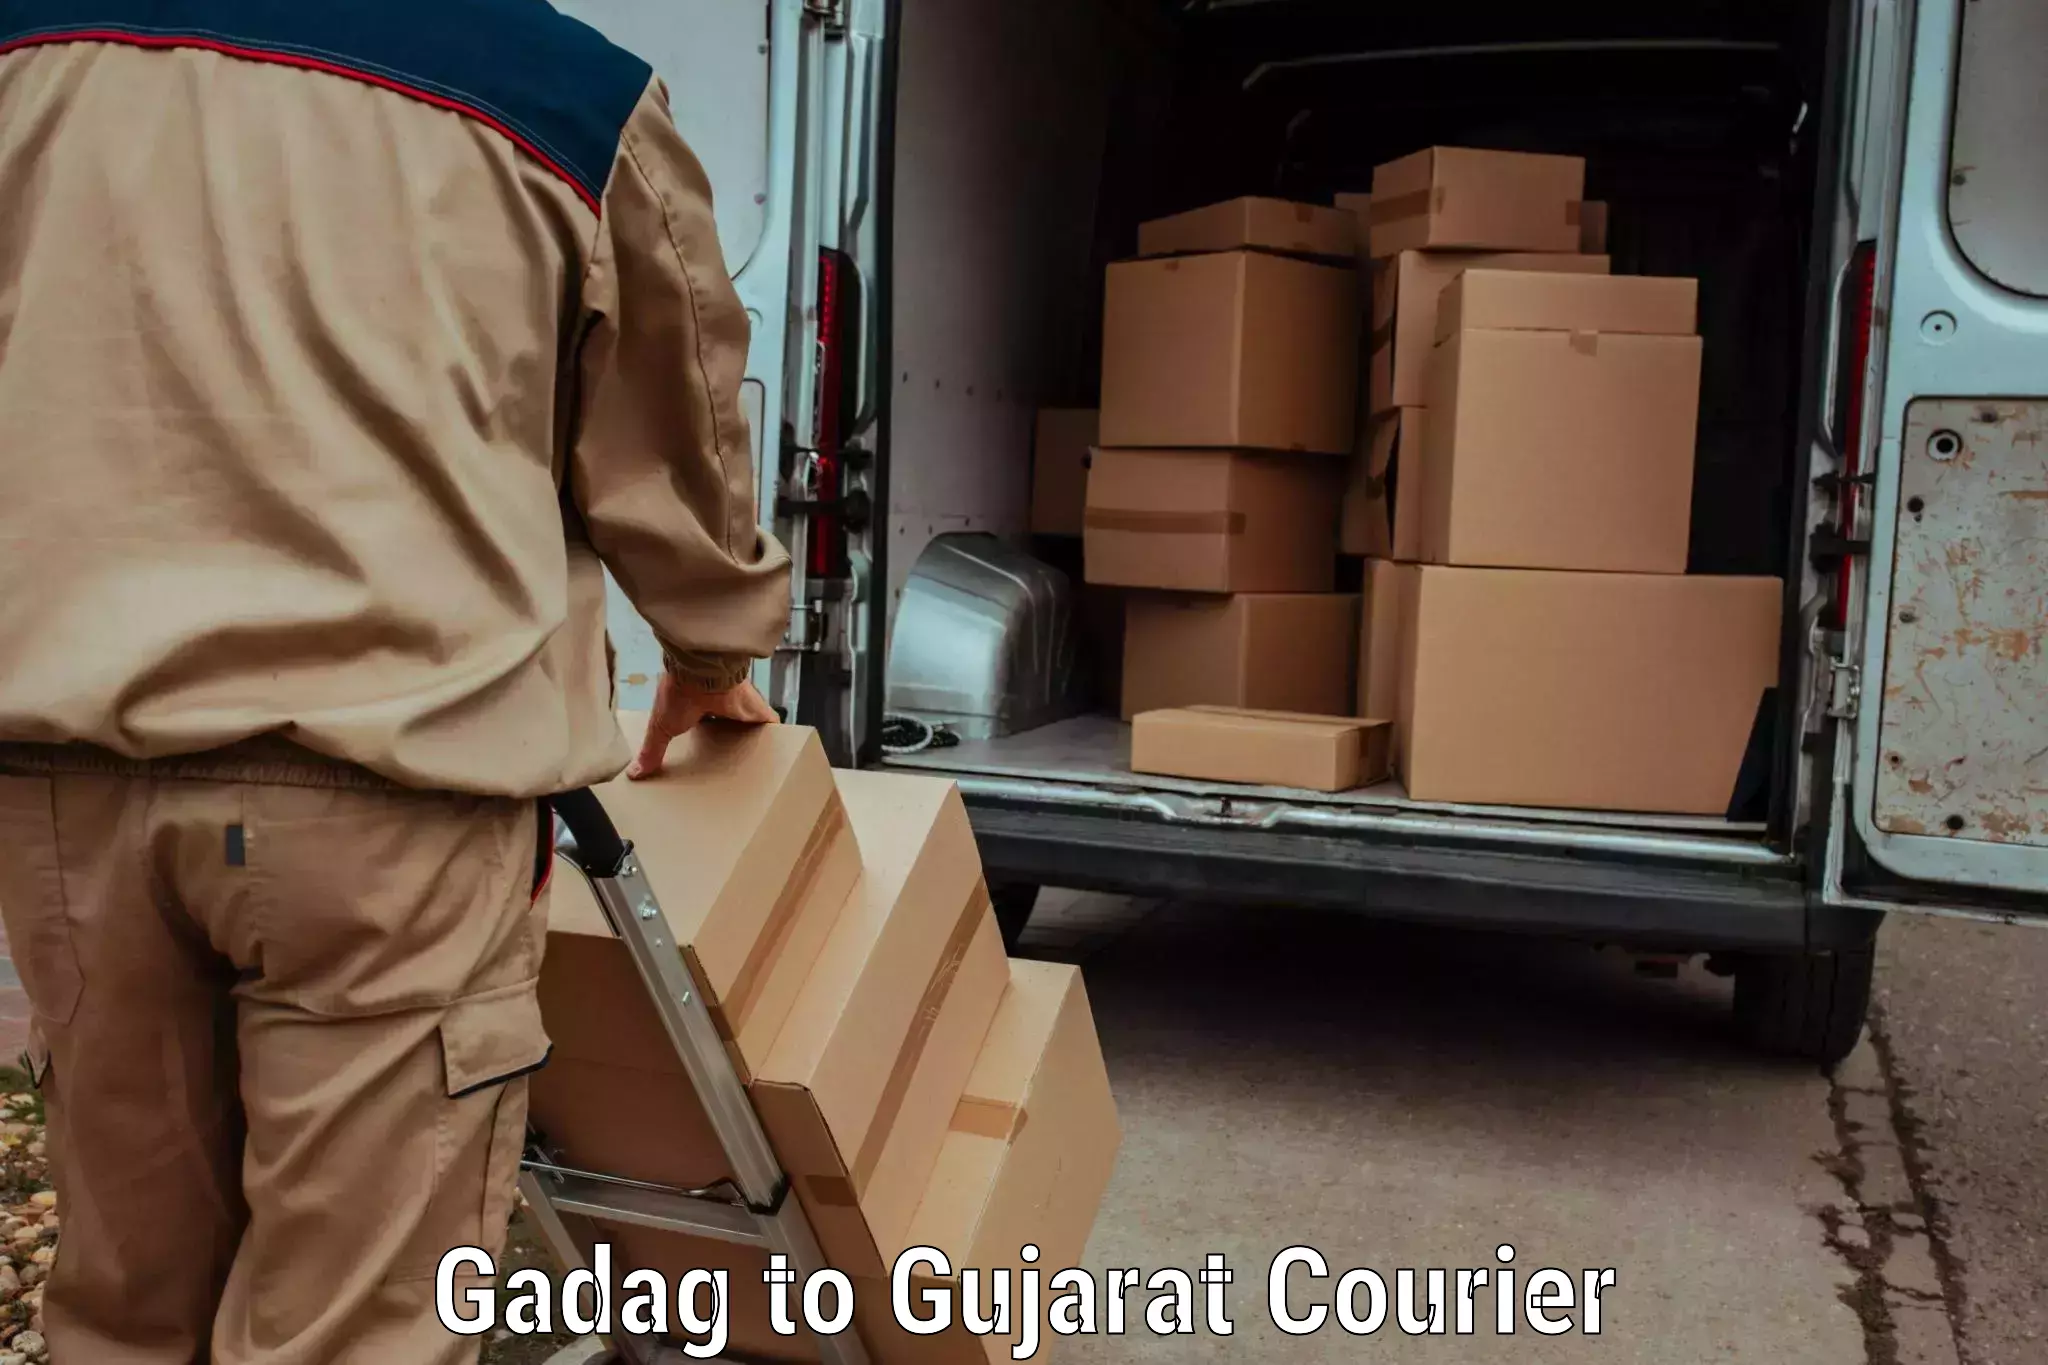 Multi-national courier services Gadag to Veraval